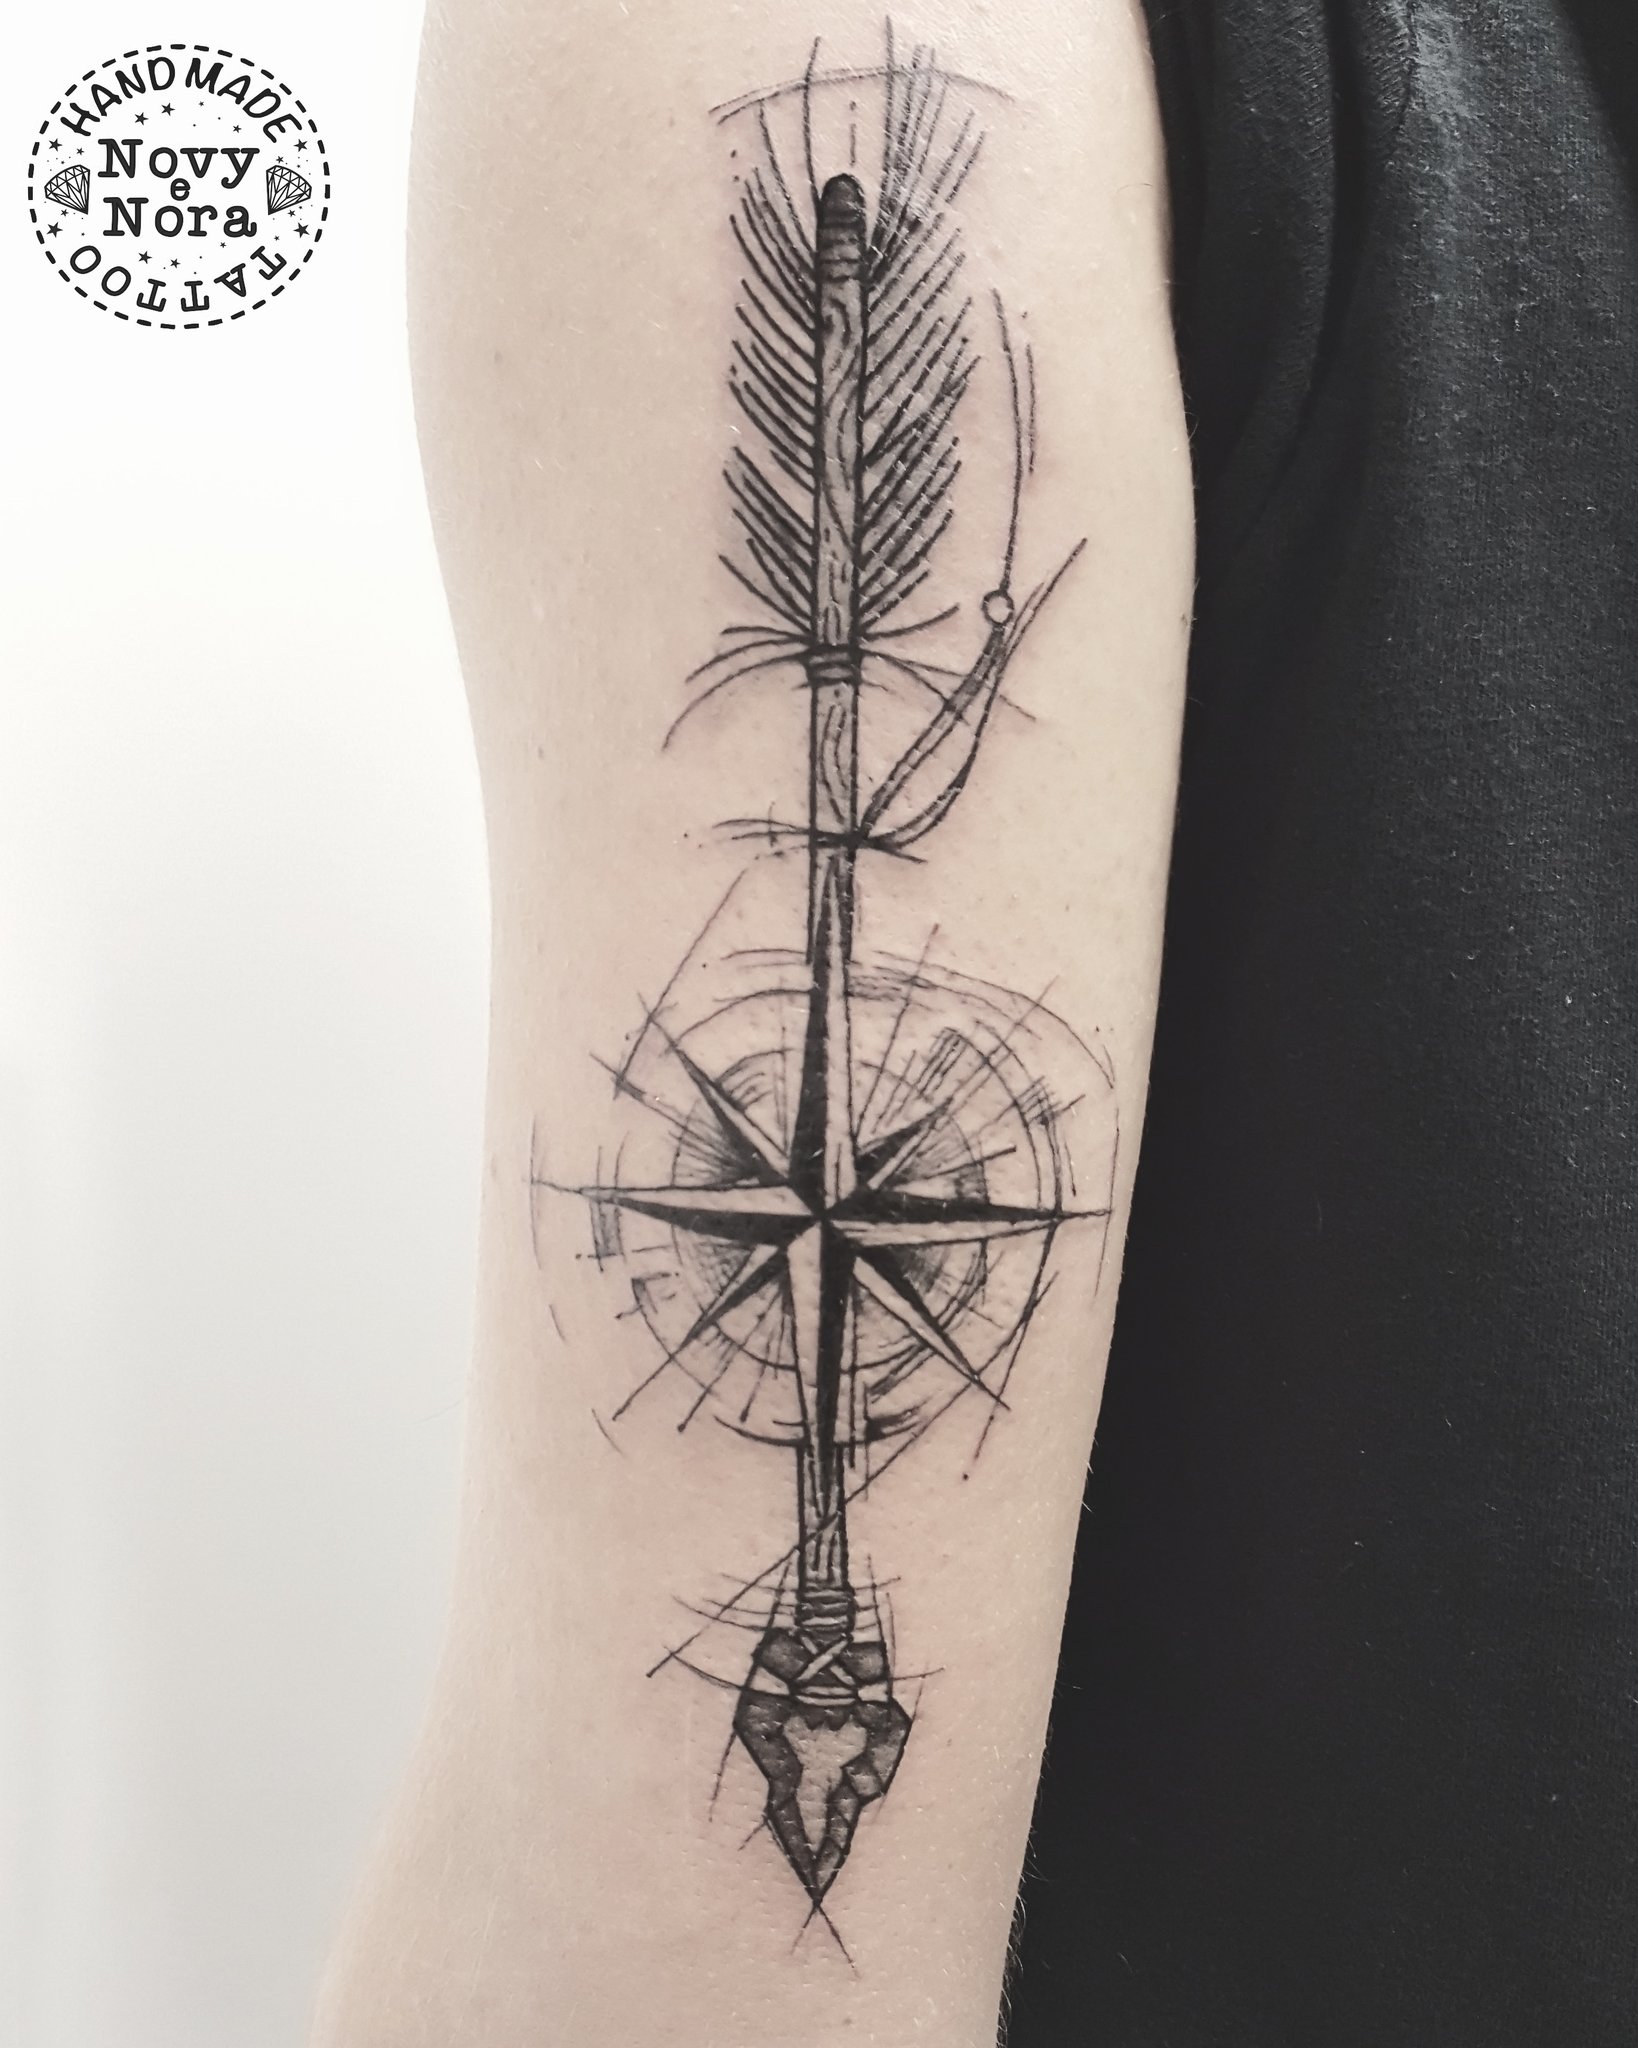 Abstract compass and arrow tattoo by SelfmadeTattooBerlin on DeviantArt